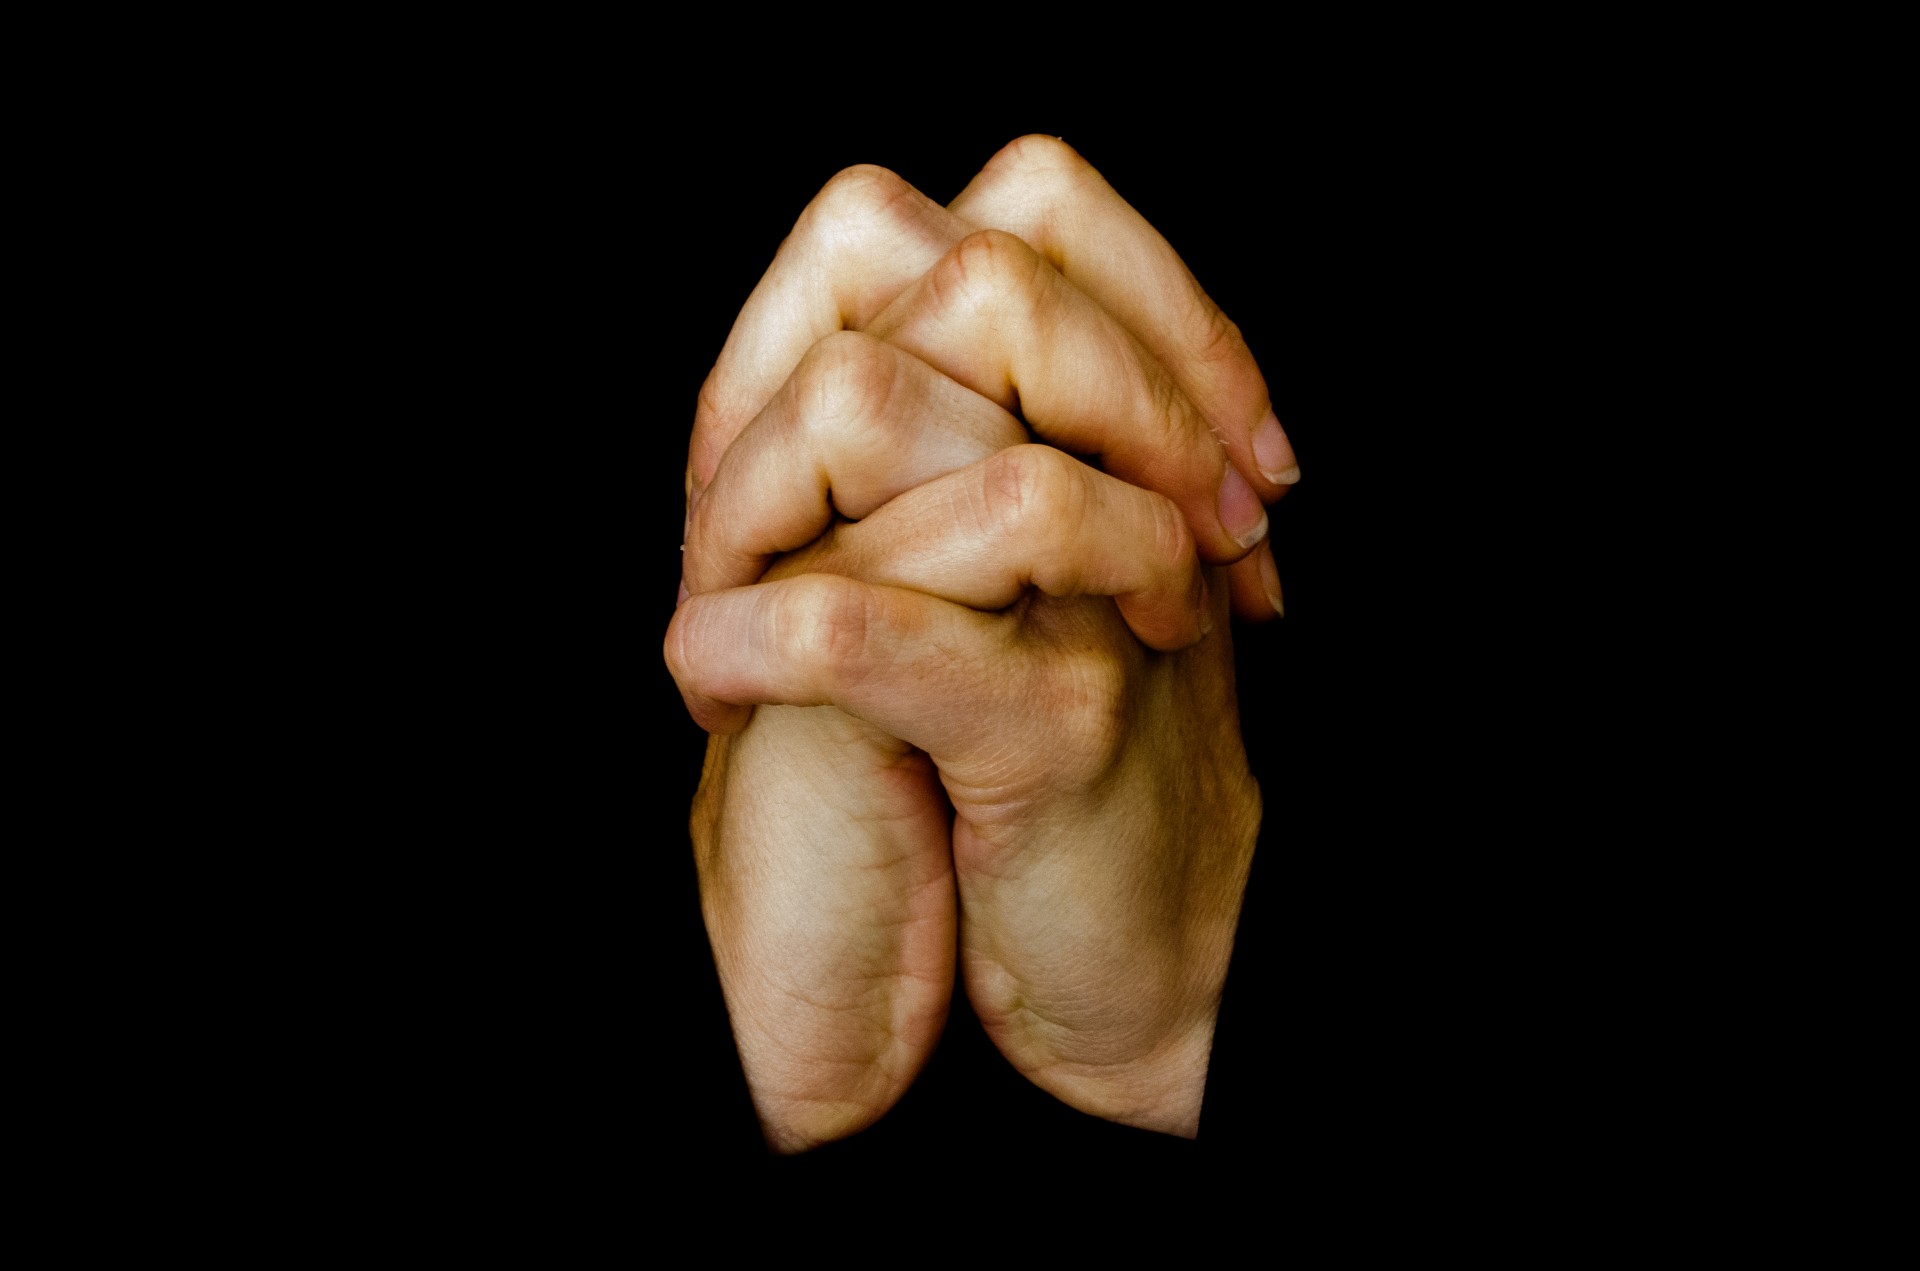 Praying Hands Free Stock Photo - Public Domain Pictures